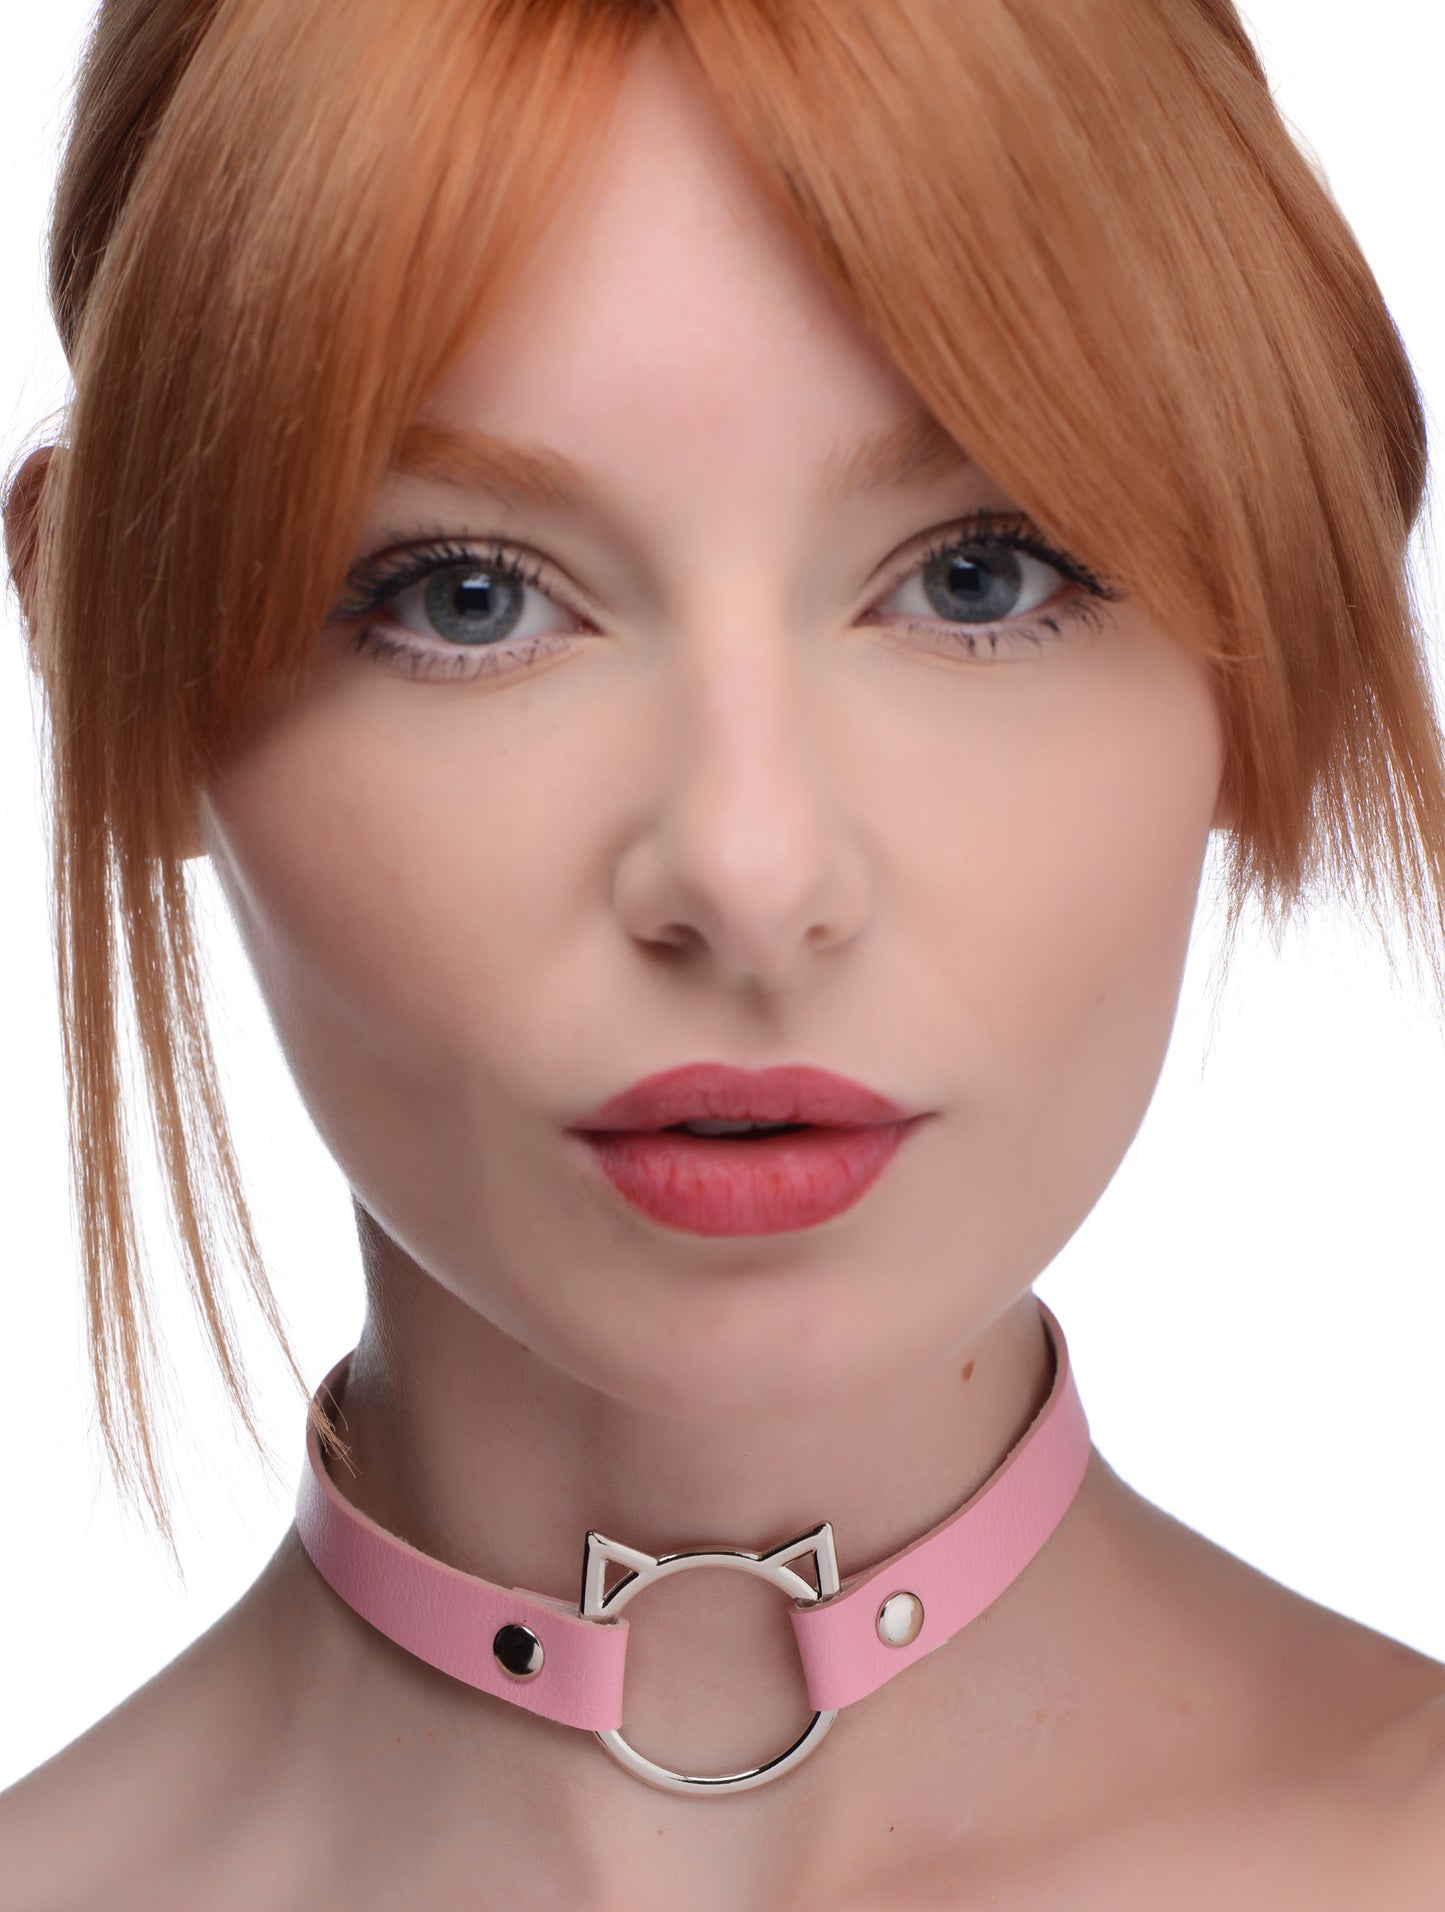 This slim and naughty Kinky Kitty Ring Choker is sure to bring out your wild side. Adjust the snap buttons for the purrrfect fit and enjoy the lightweight PU leather material that feels soft on the skin. The nickel-free metal hardware is tough enough to withstand light pulls and the slim band adds a subtle but delicious BDSM touch. 